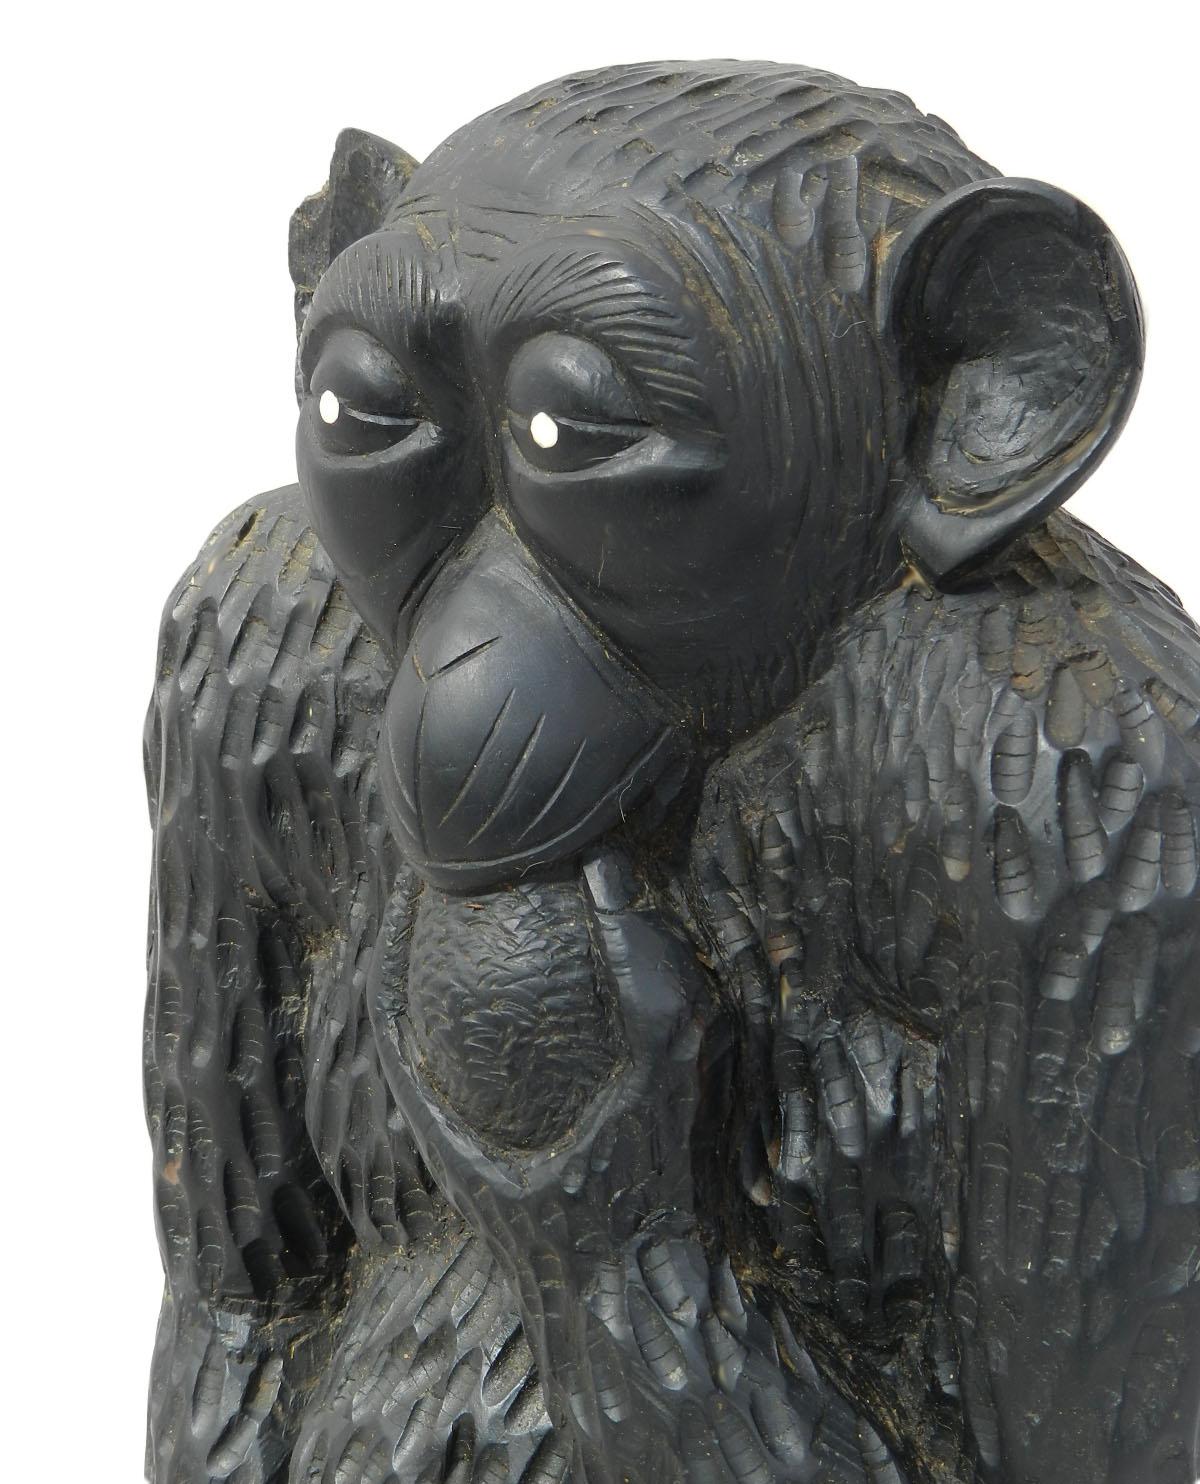 African monkey statue hand carved sculpture unique one of a kind
Solid wood
Early 20th century possibly older
Charming, impressive and very decorative
Large and heavy
Very good antique condition with a couple of very minor losses not